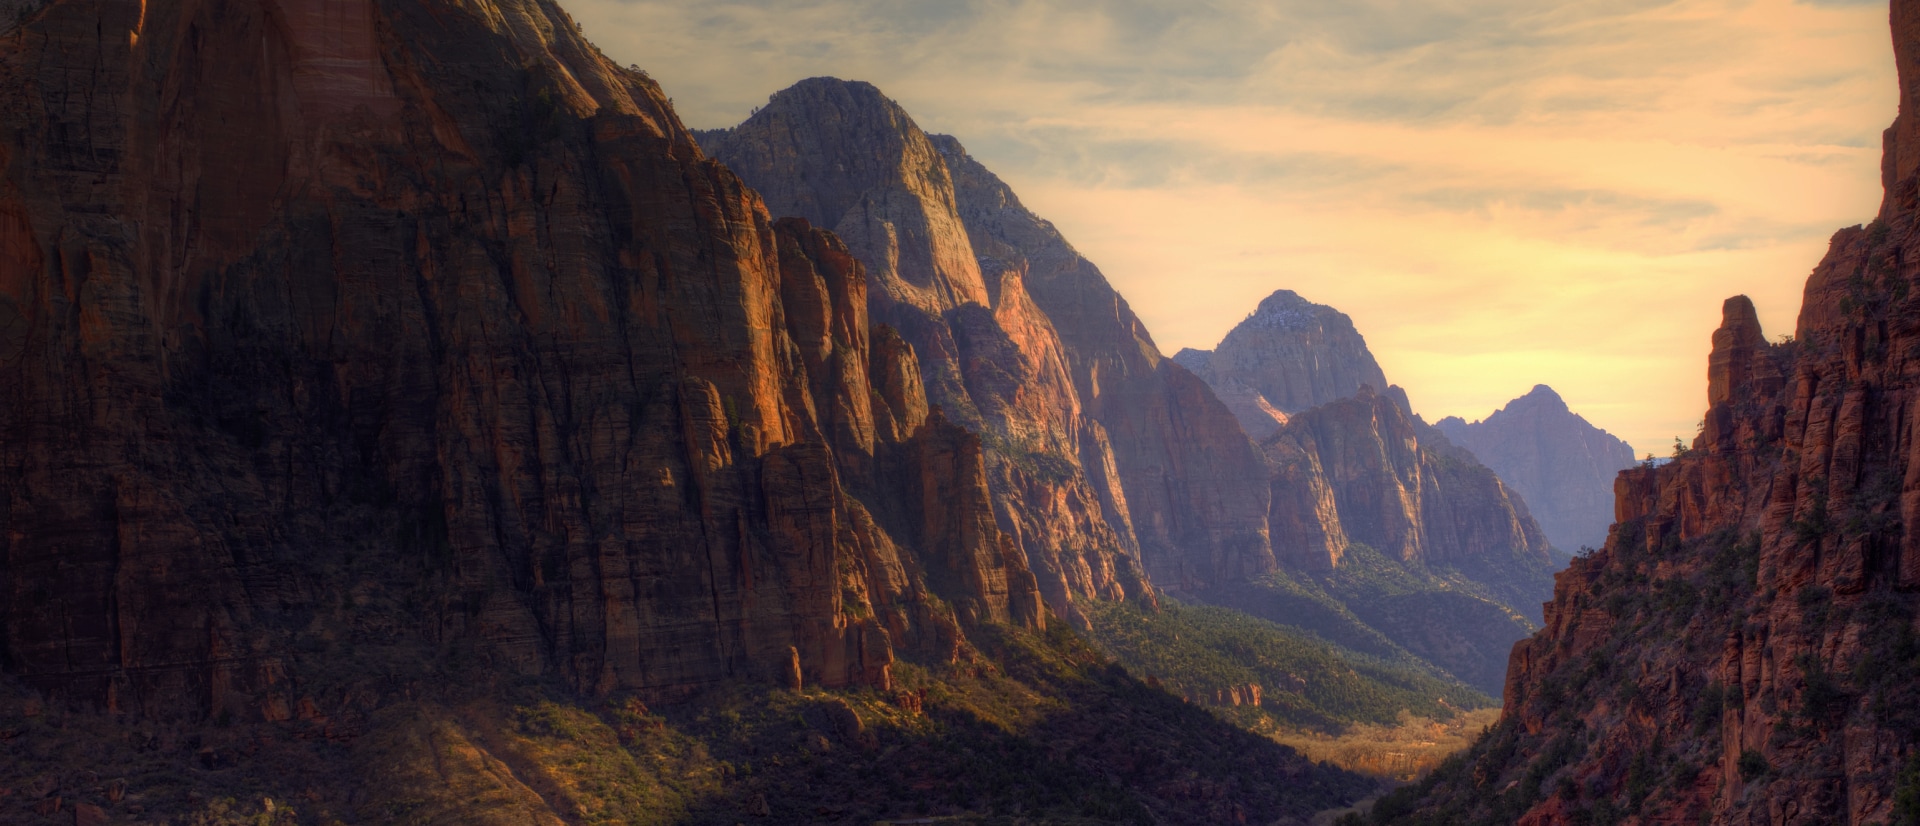 Planning a trip to Zion National Park